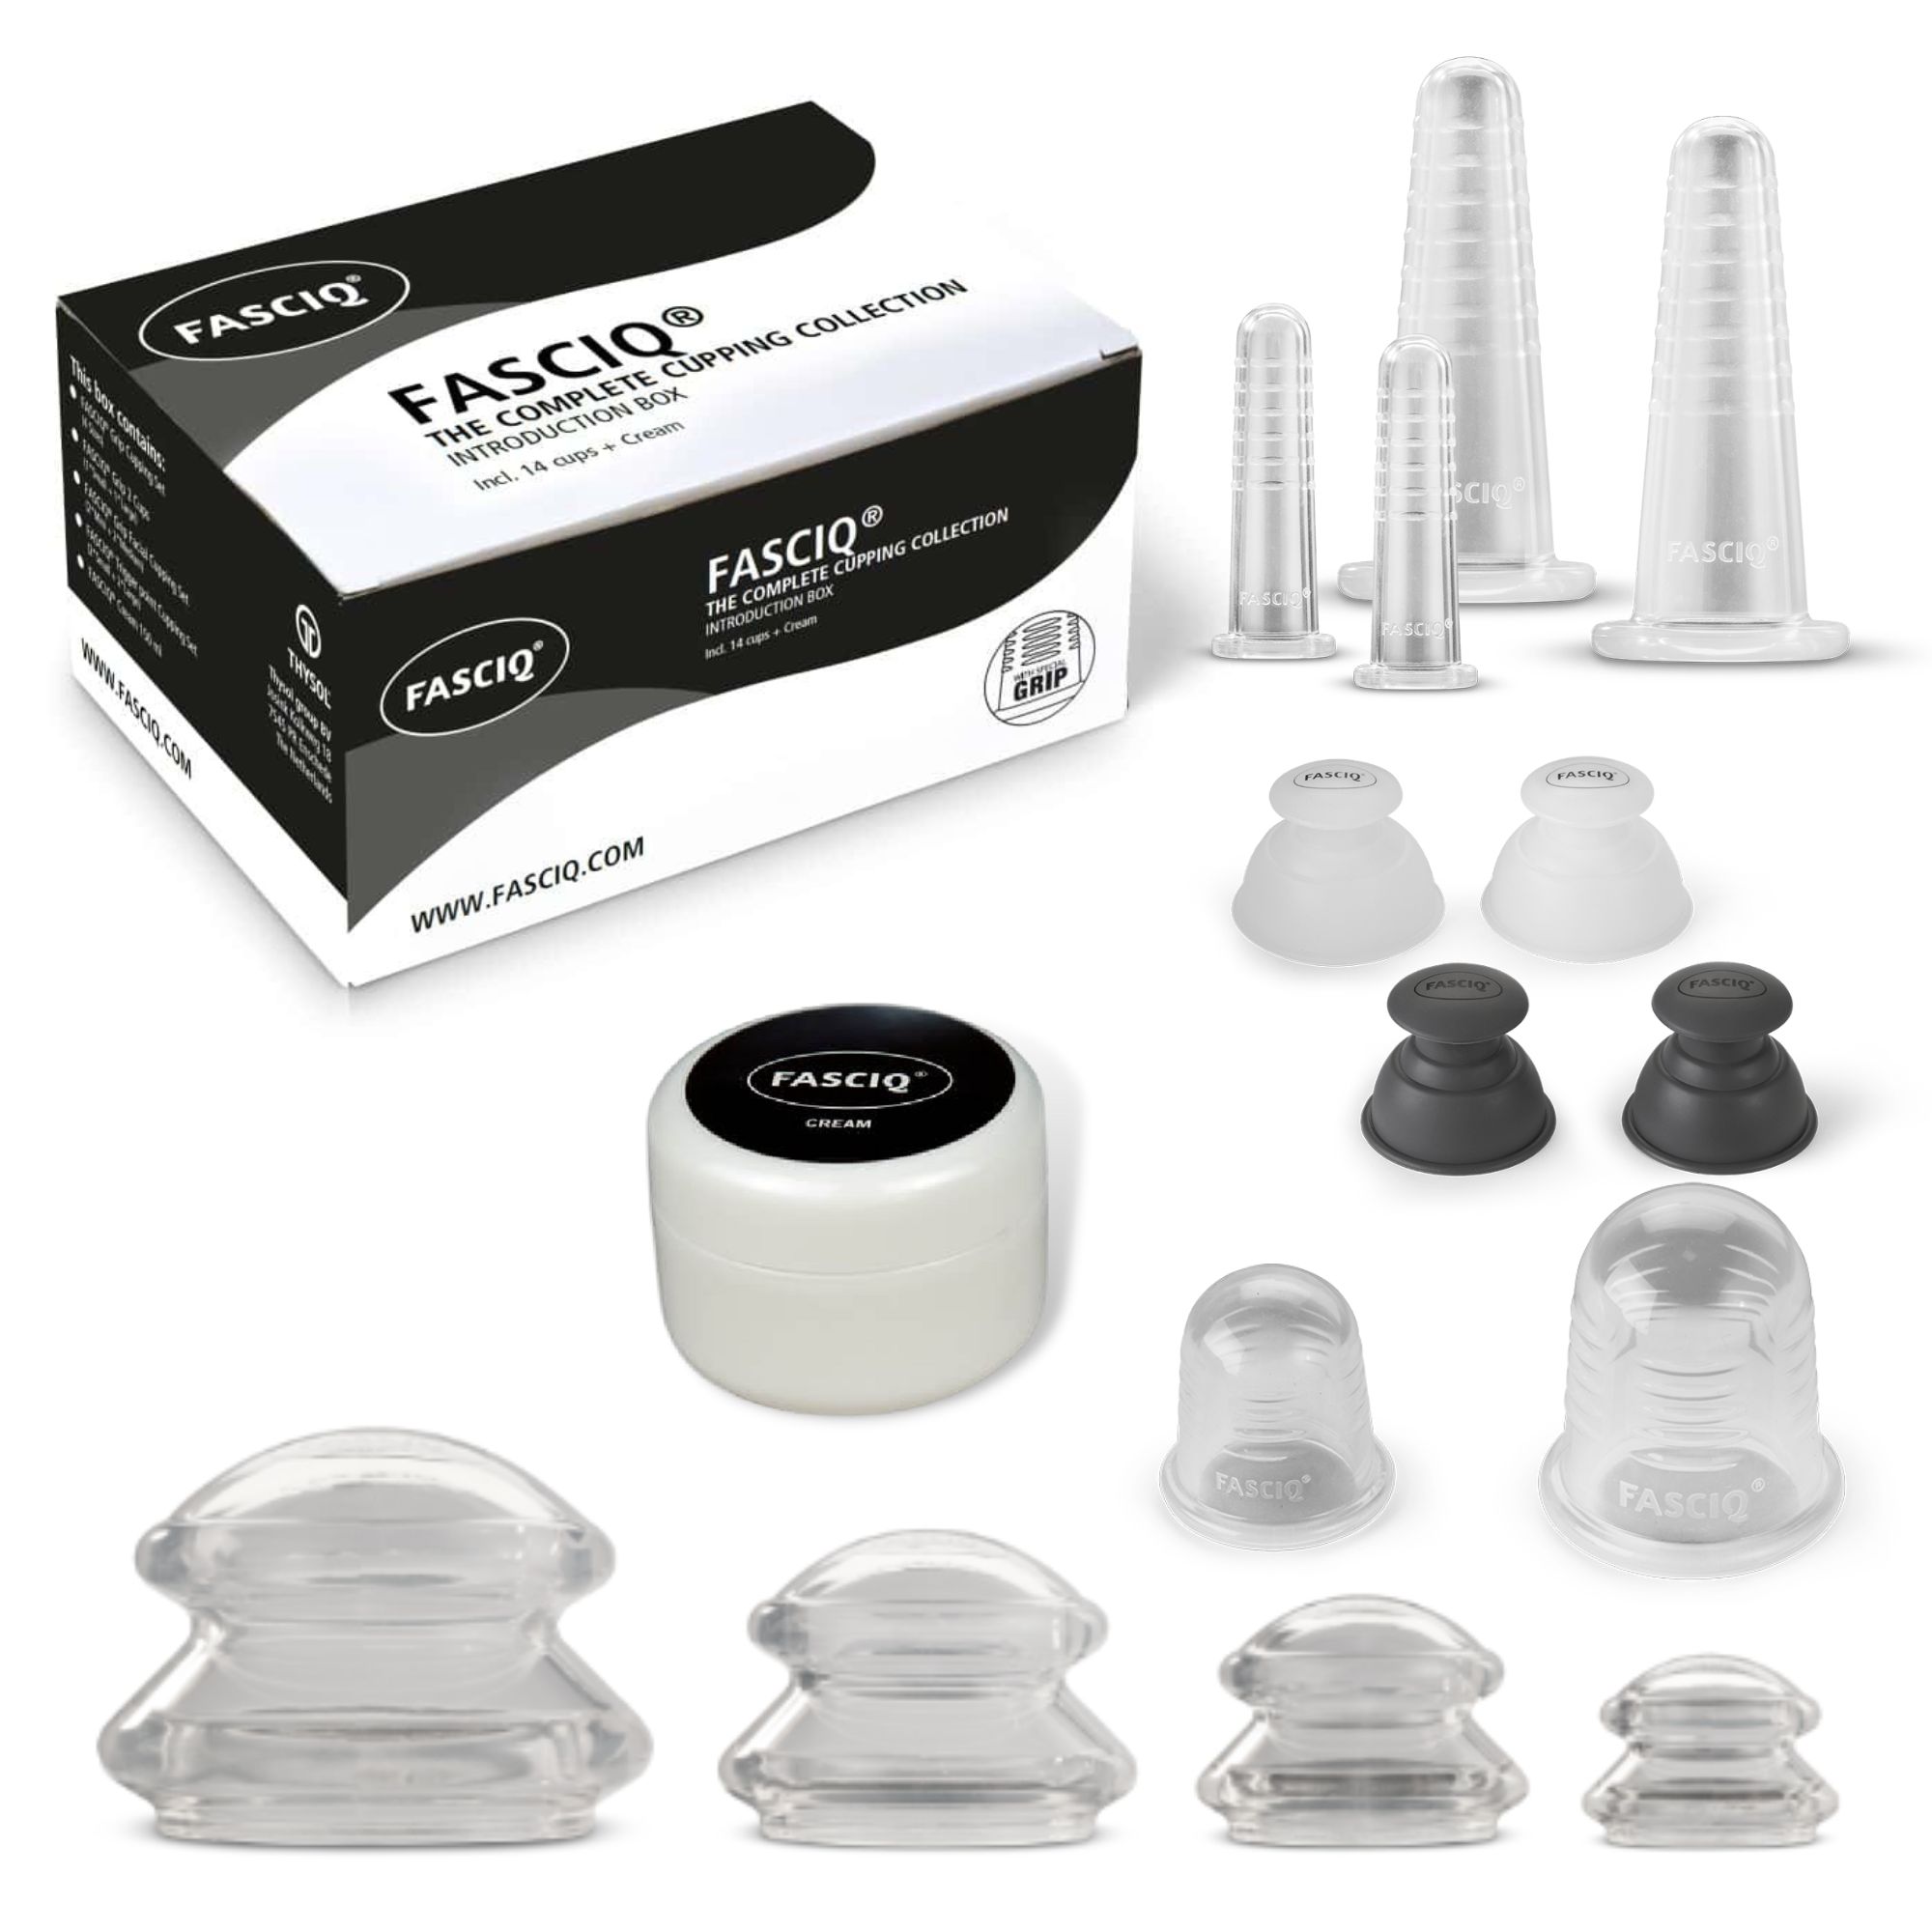 FASCIQ Ultimate Cupping Collection Box